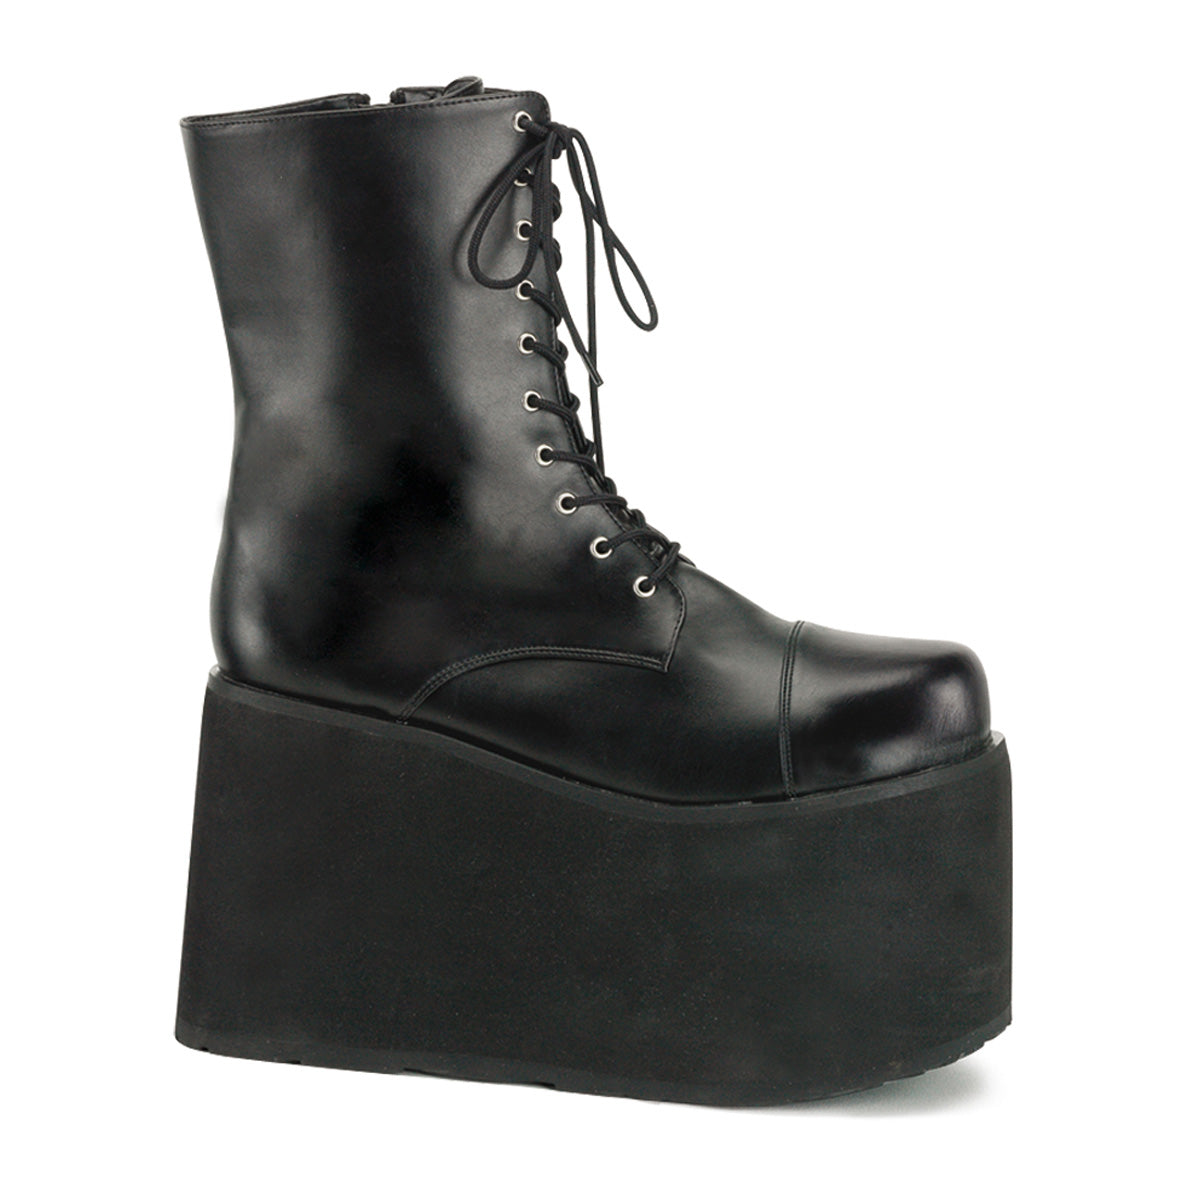 MONSTER-10 Black Ankle Boots